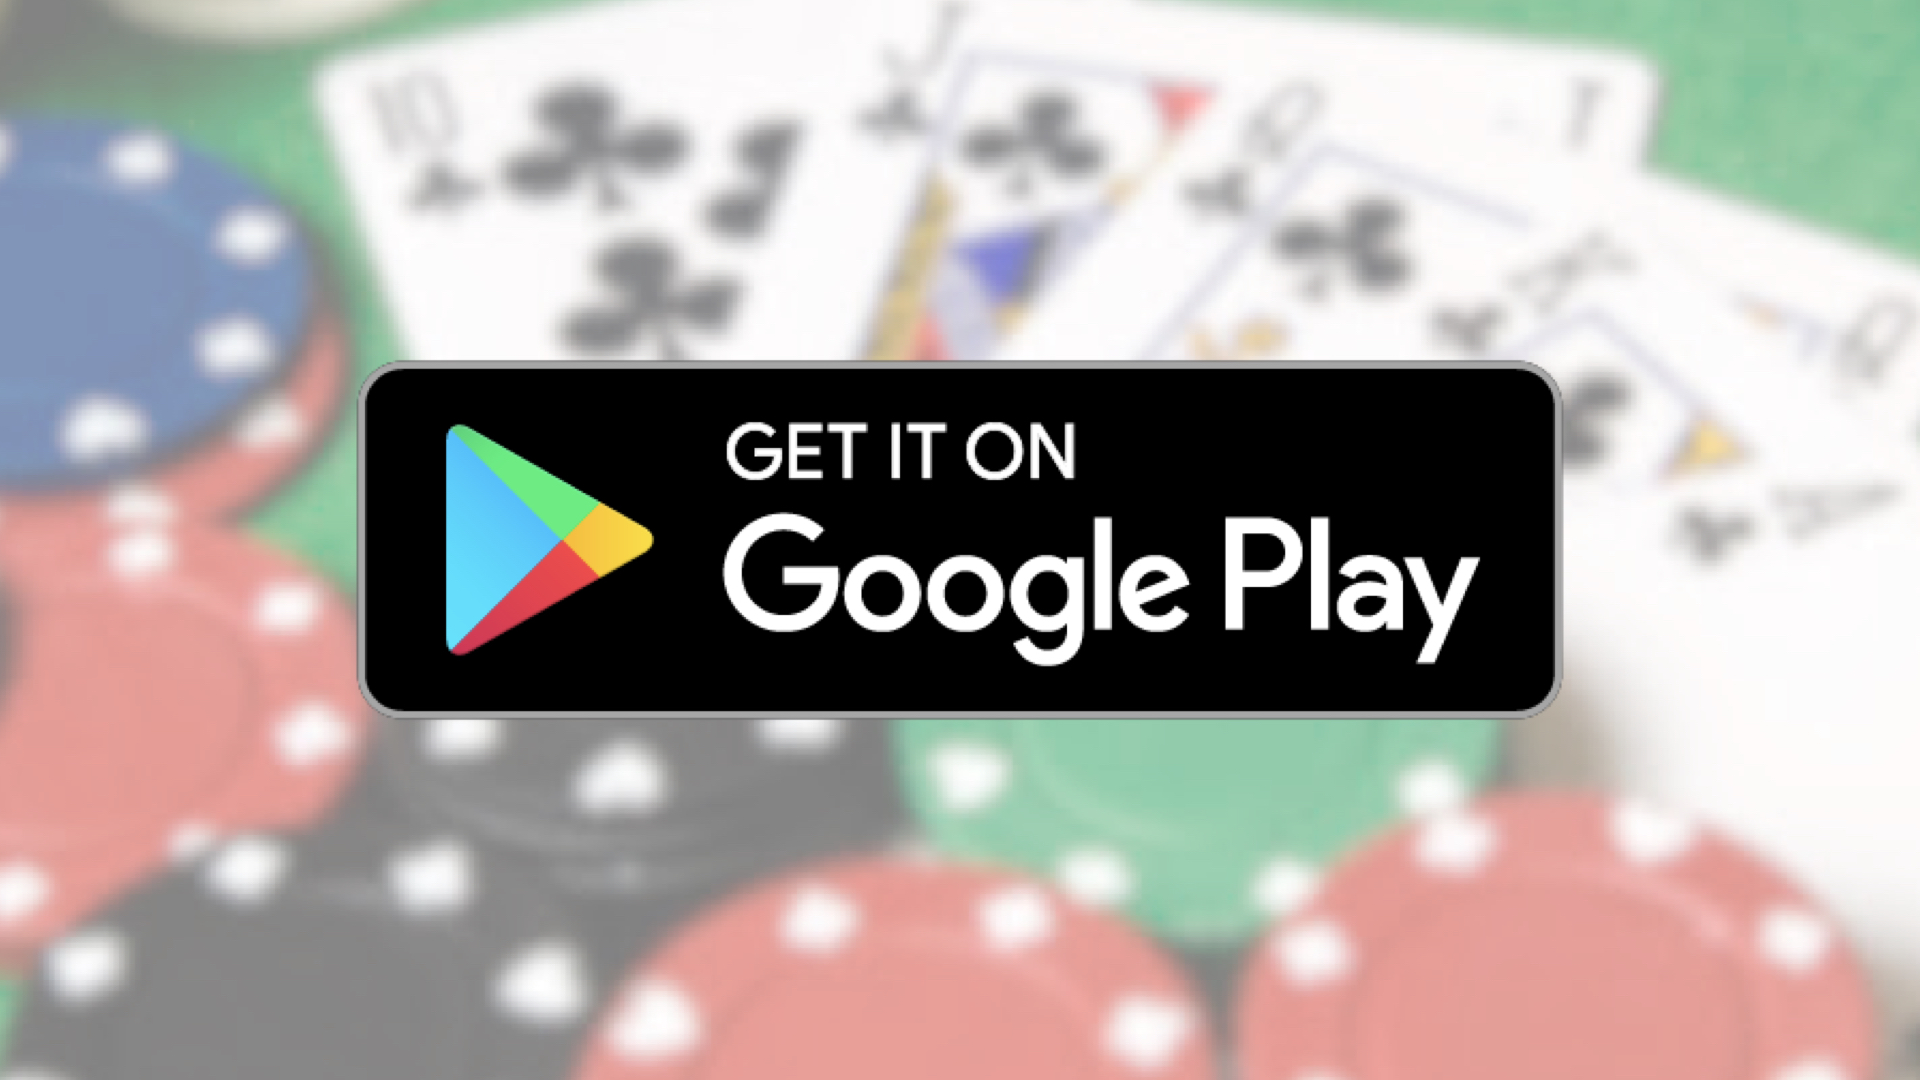 Google Play allows gambling apps for Australia, New Zealand, and Japan